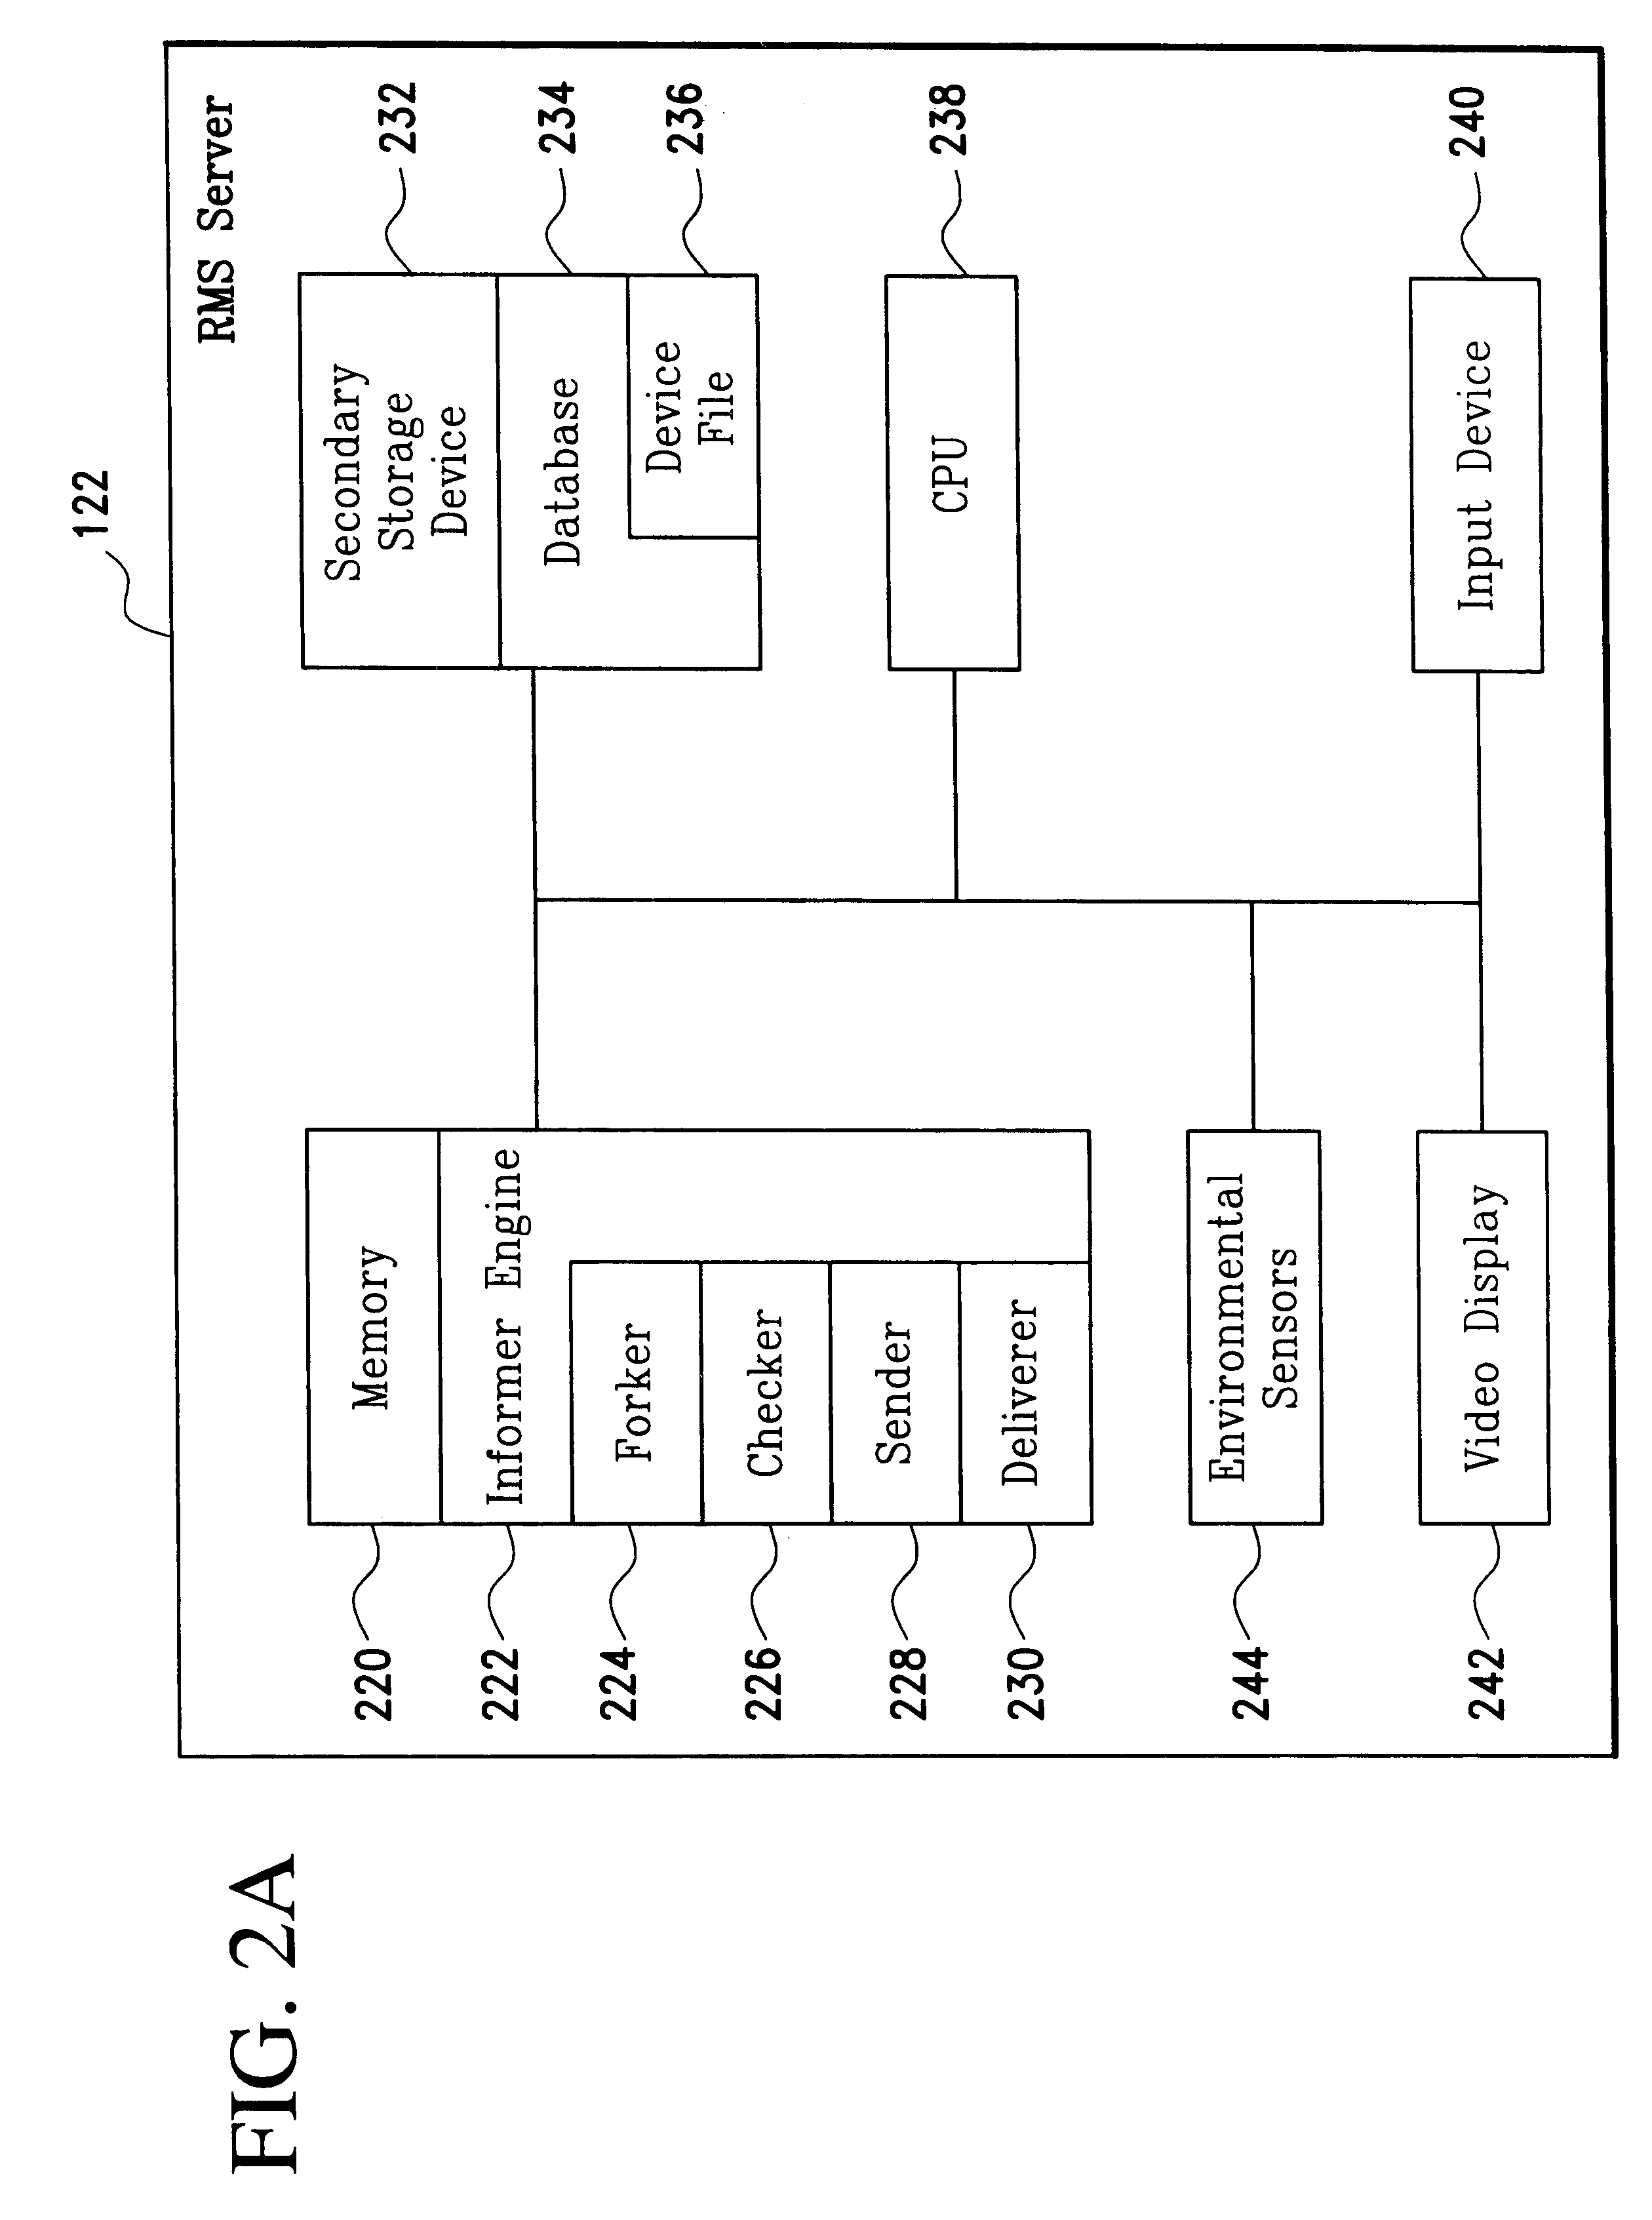 Method, apparatus, and article of manufacture for a network monitoring system